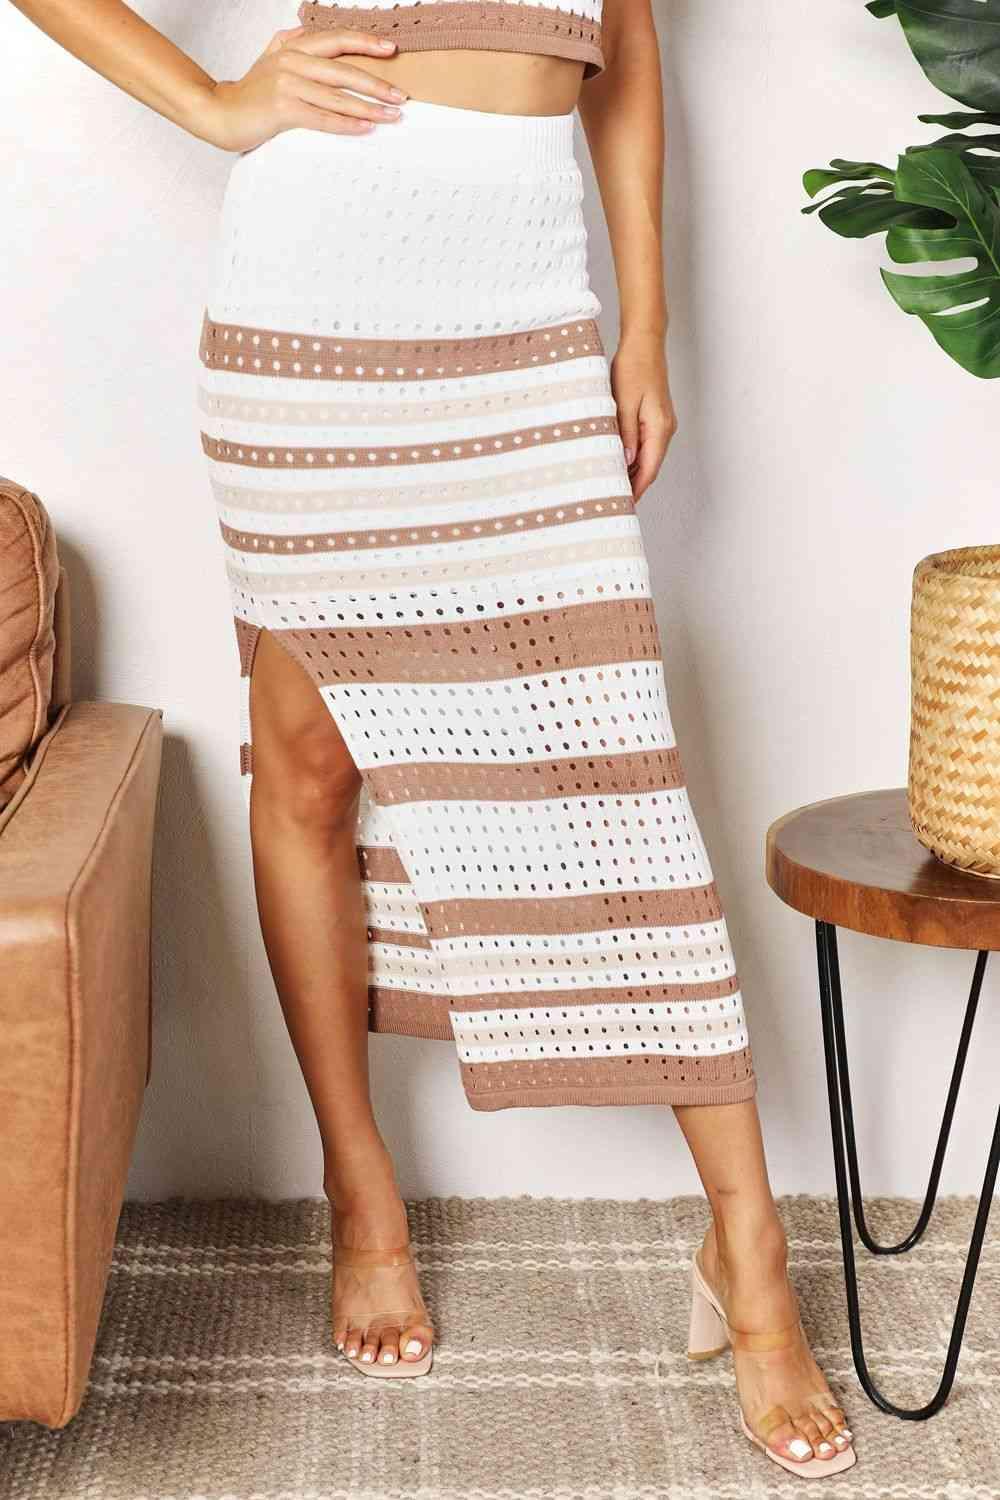 Double Take Striped Openwork Cropped Tank and Split Skirt Set - Lab Fashion, Home & Health